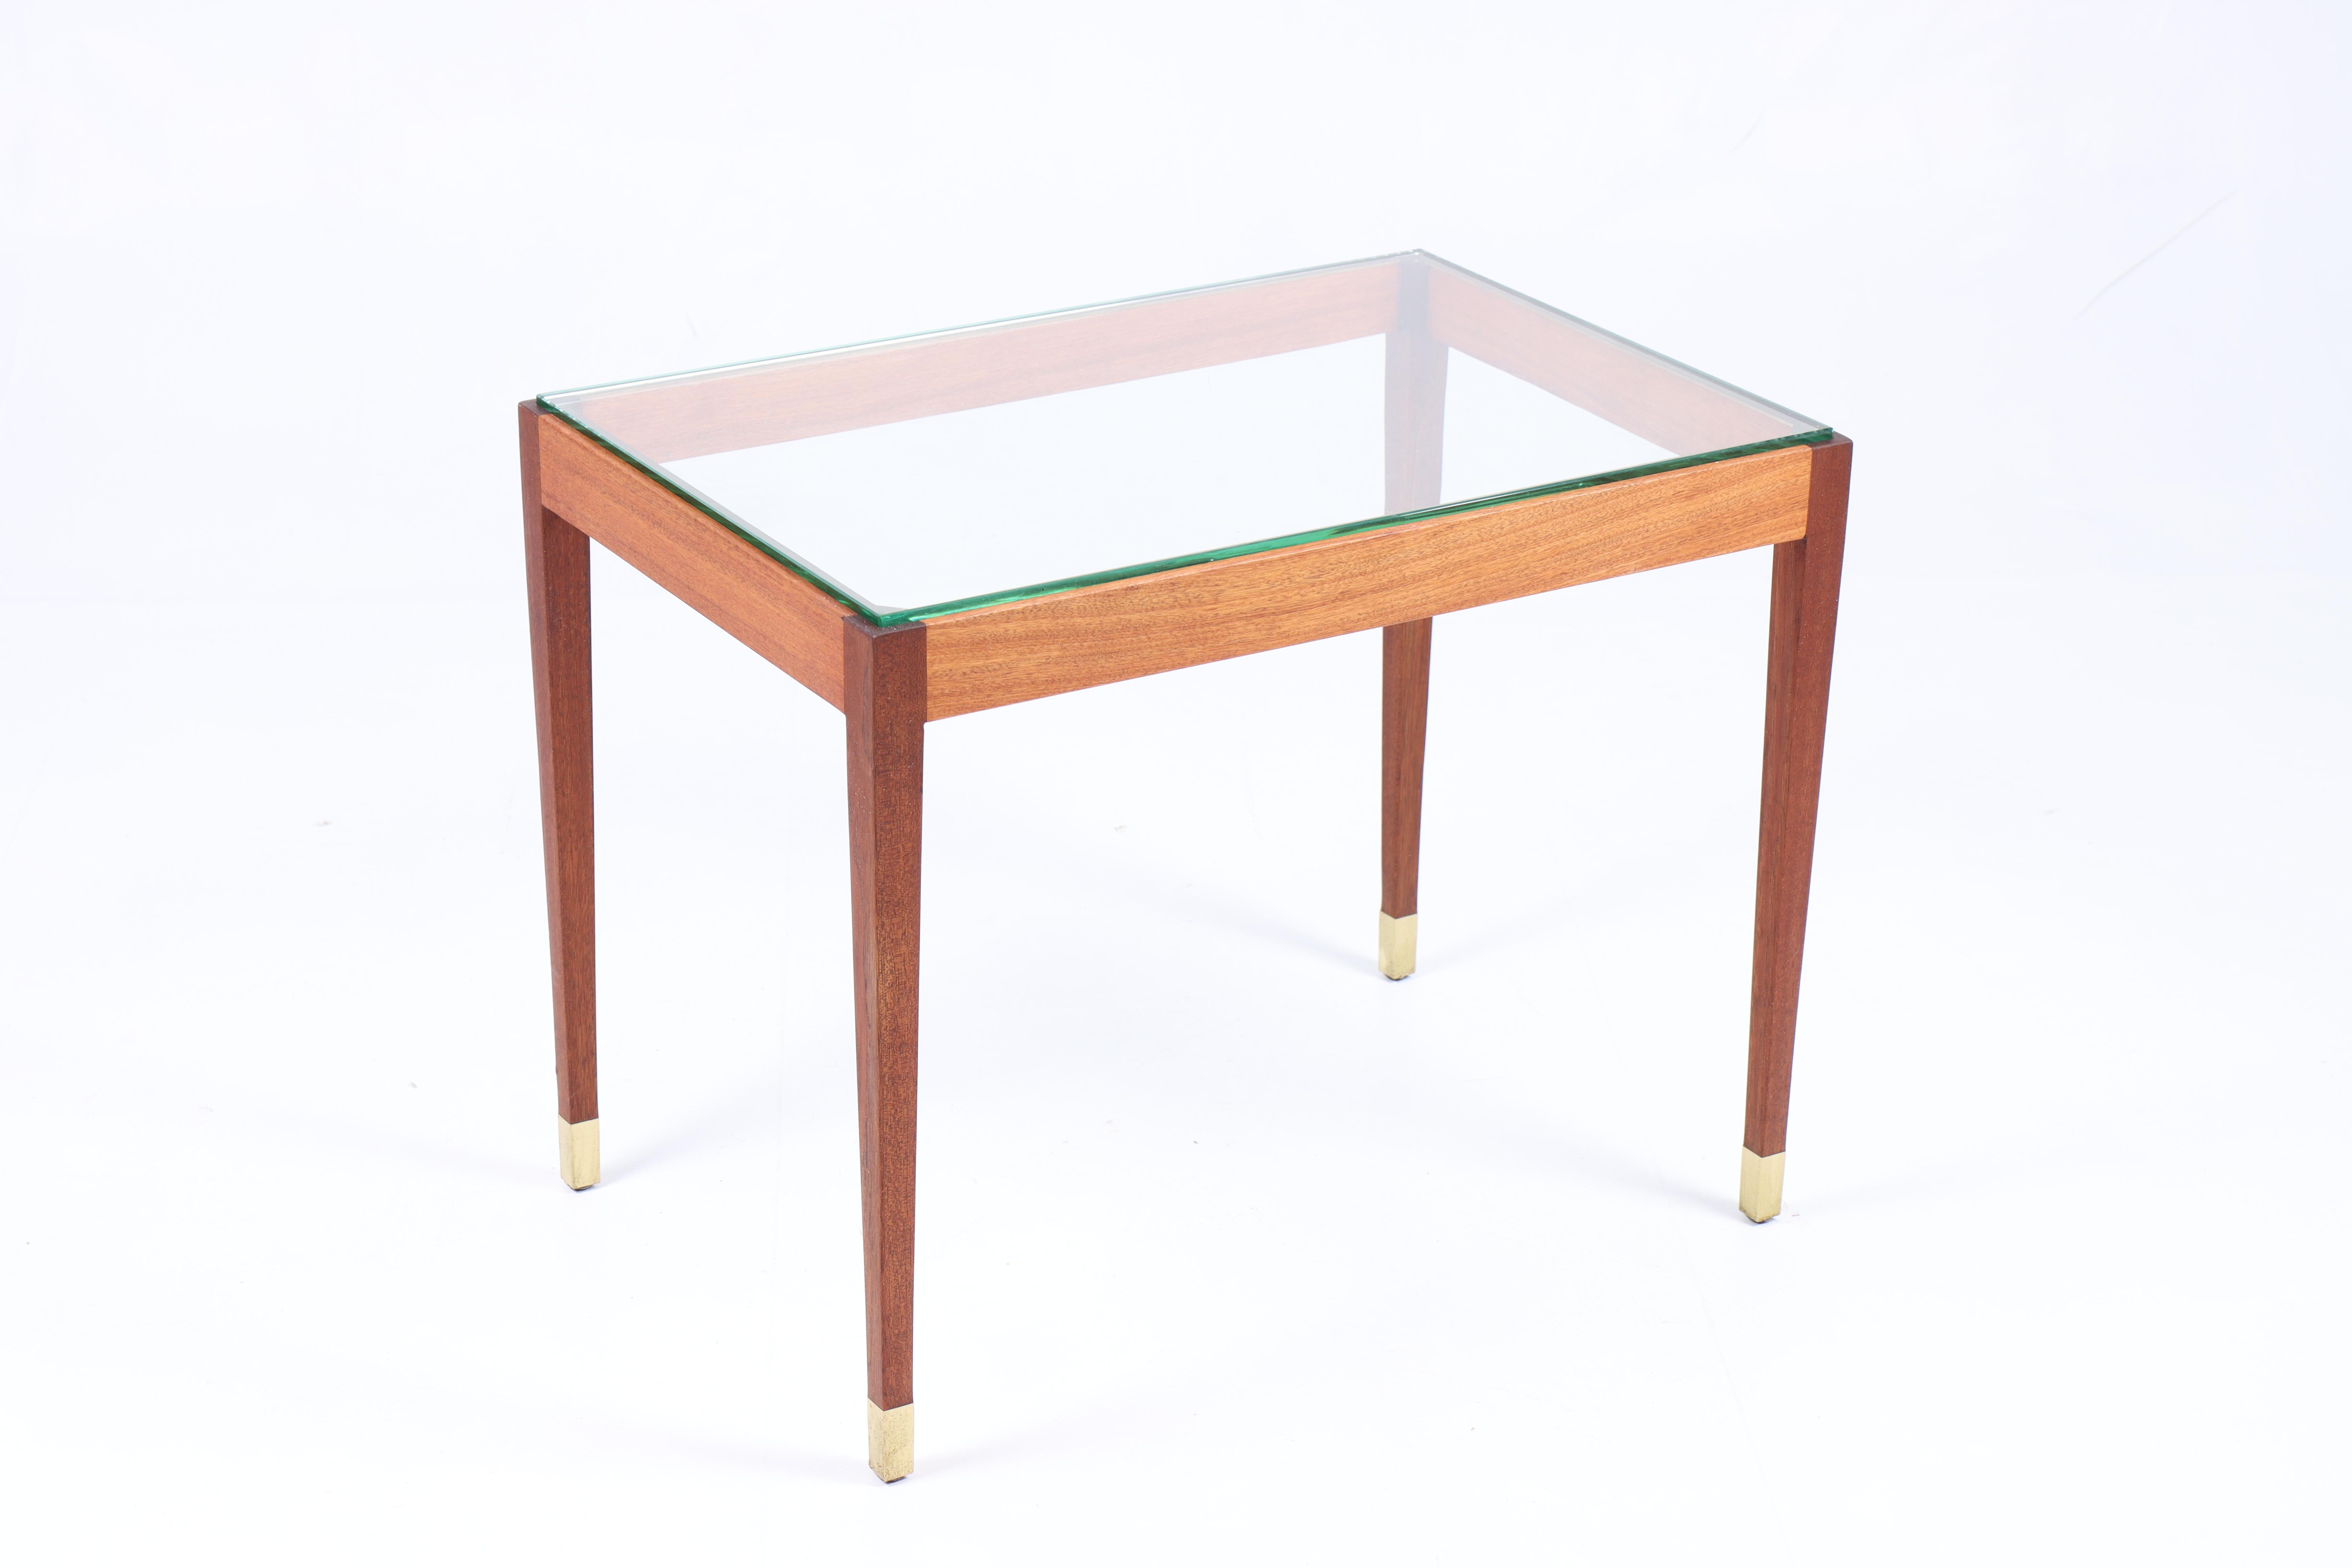 Mid-20th Century Midcentury Low Table in Glass and Teak, Made in Denmark 1960s For Sale